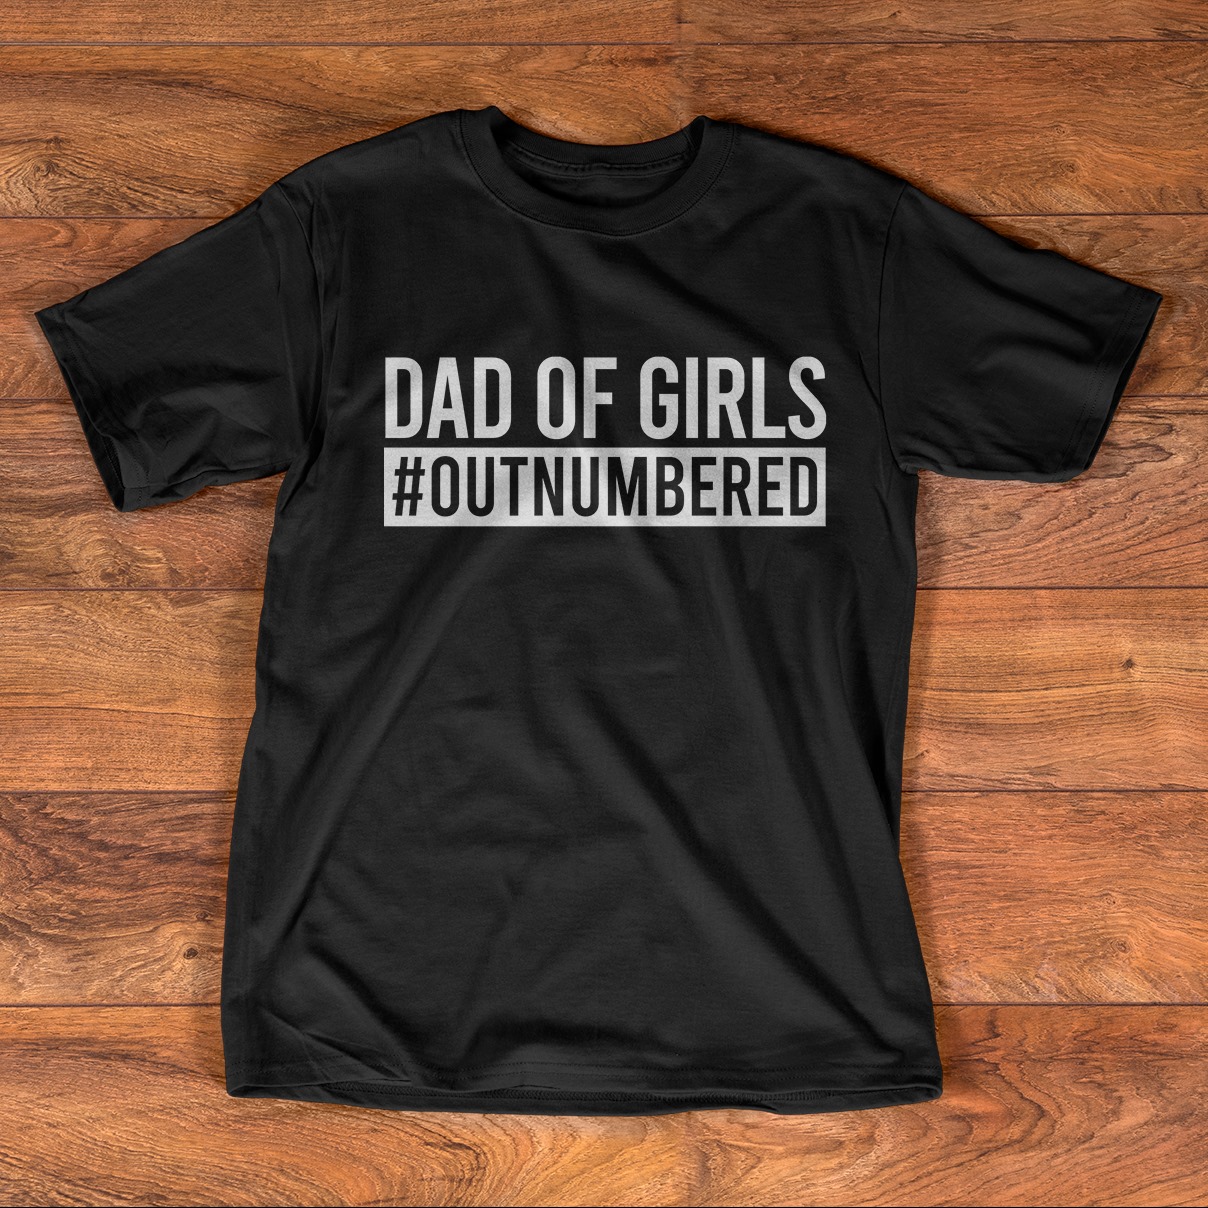 Dad of girls outnumbered